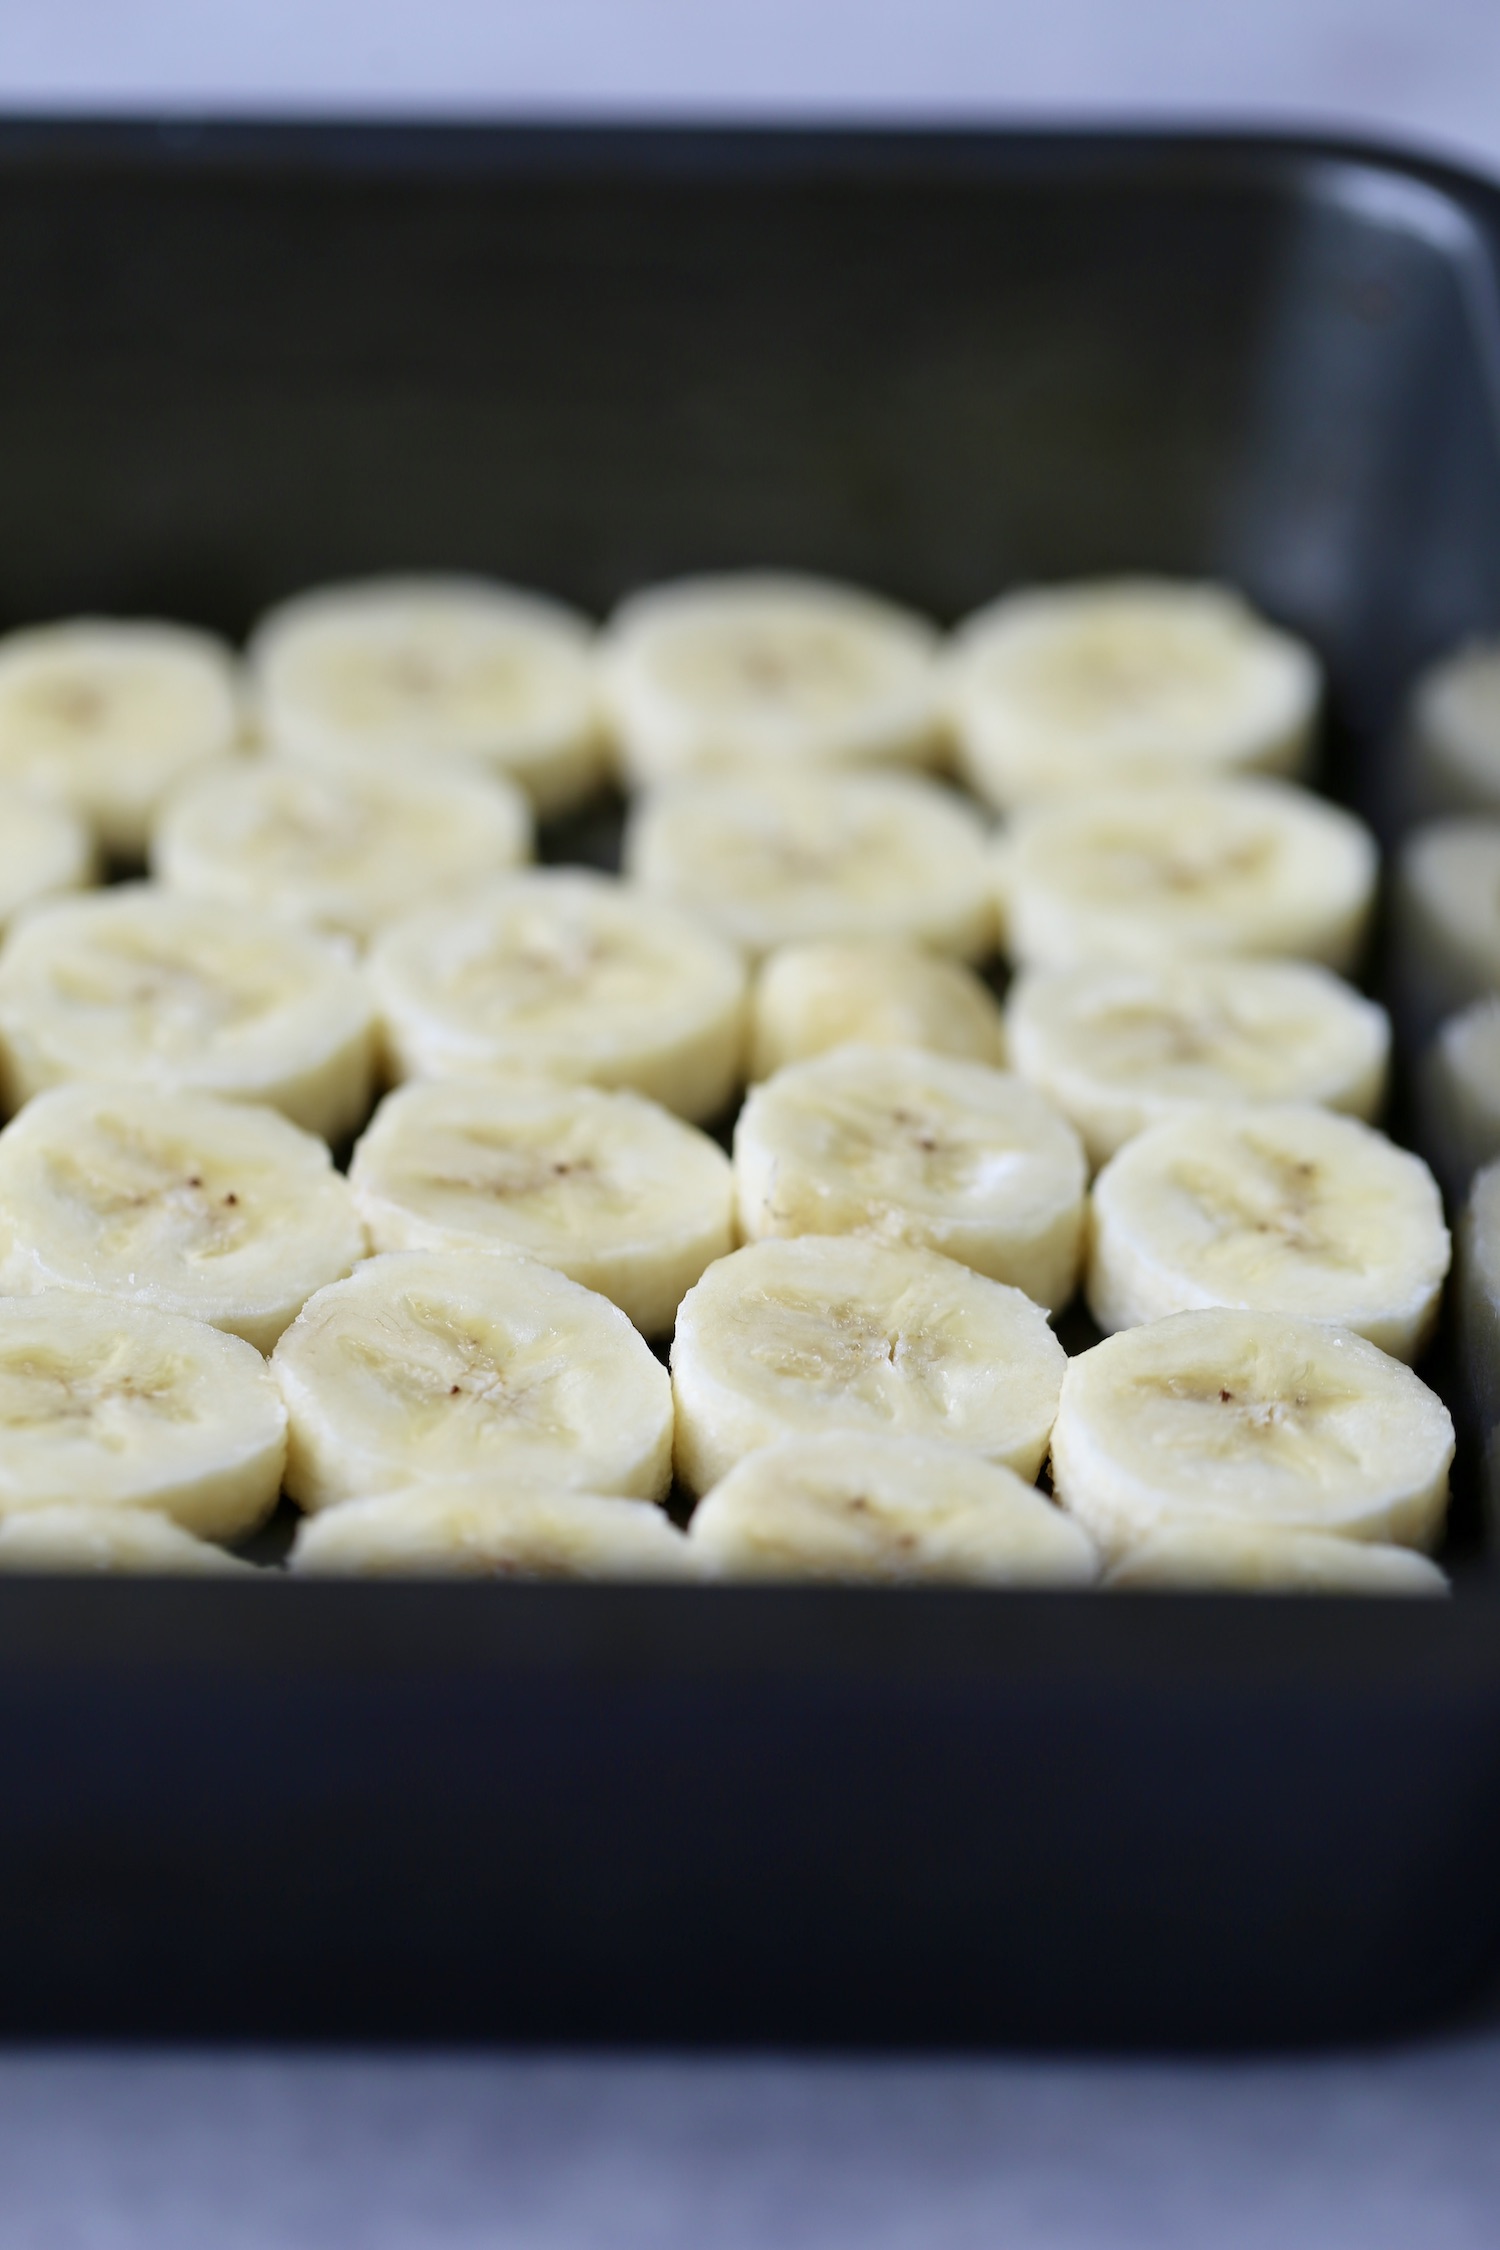 sliced bananas on the bottom of a baking dish